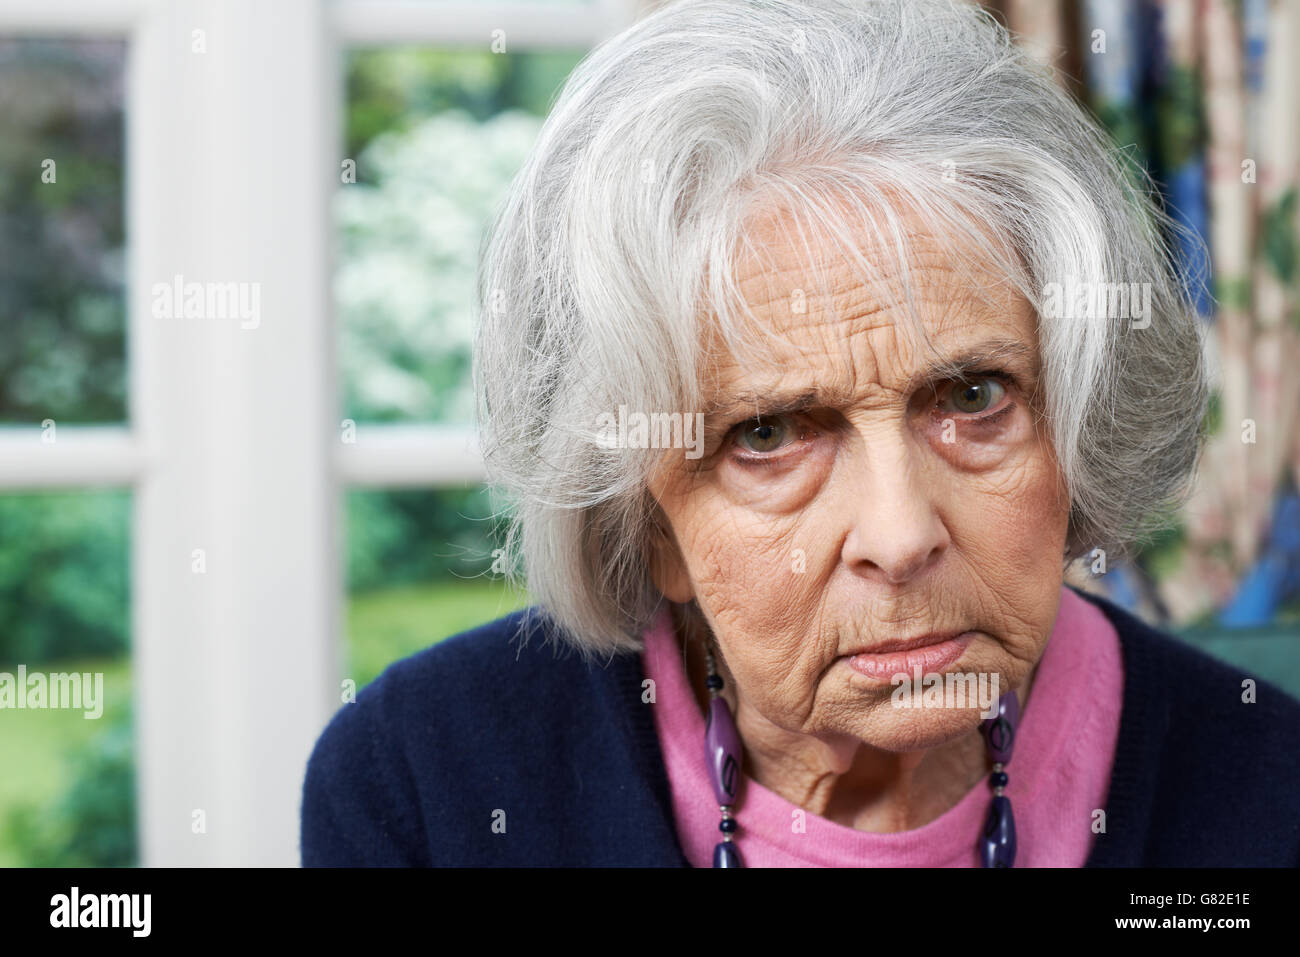 Head And Shoulders Portrait Of Angry Senior Woman At Home Stock Photo